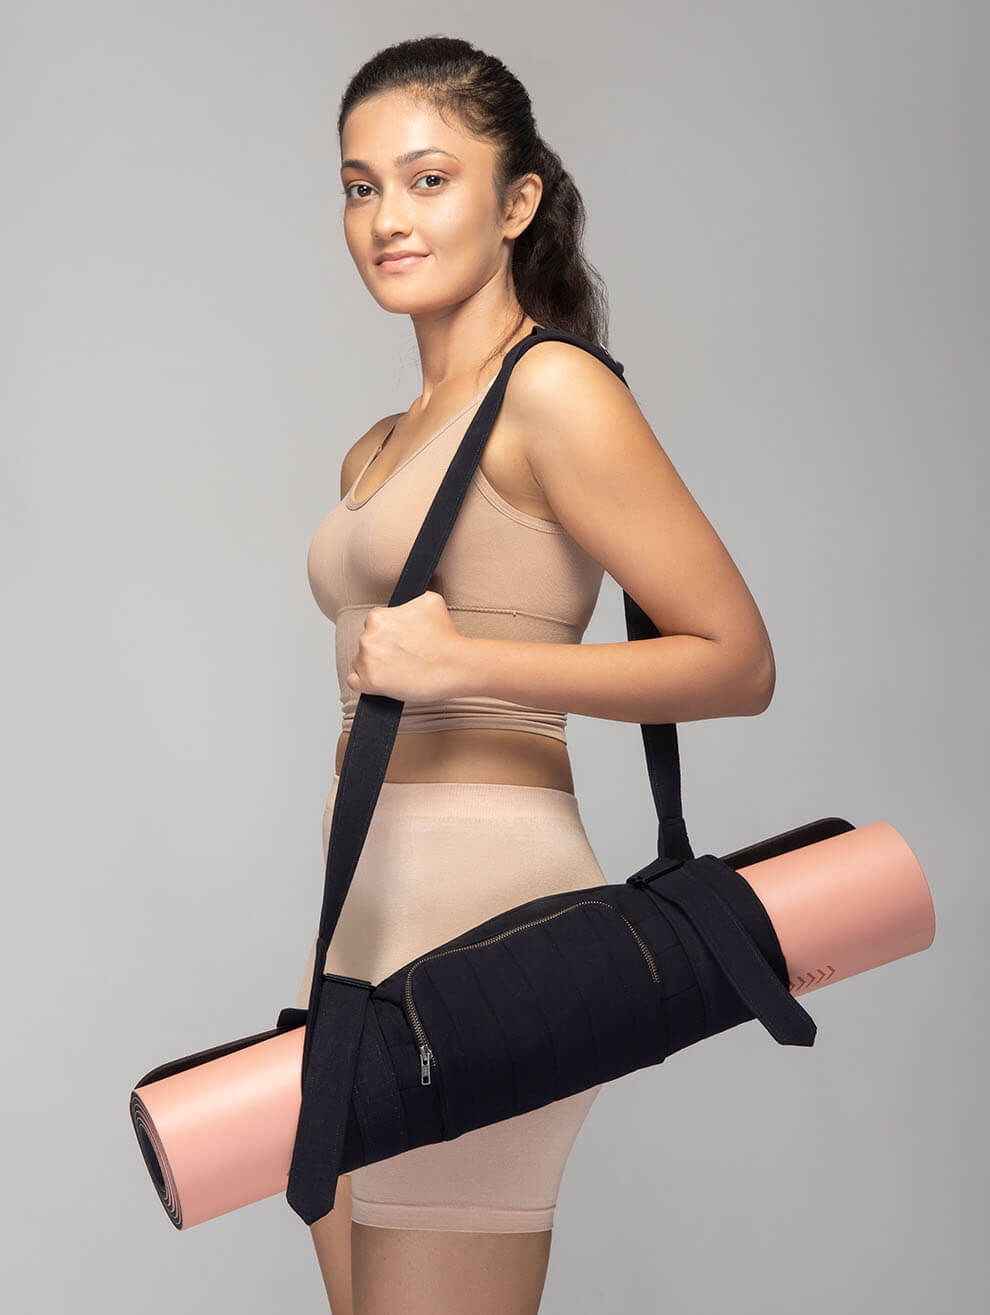 Yoga EVO Yoga Bag, Large Yoga Mat Bags and Carriers for Women India